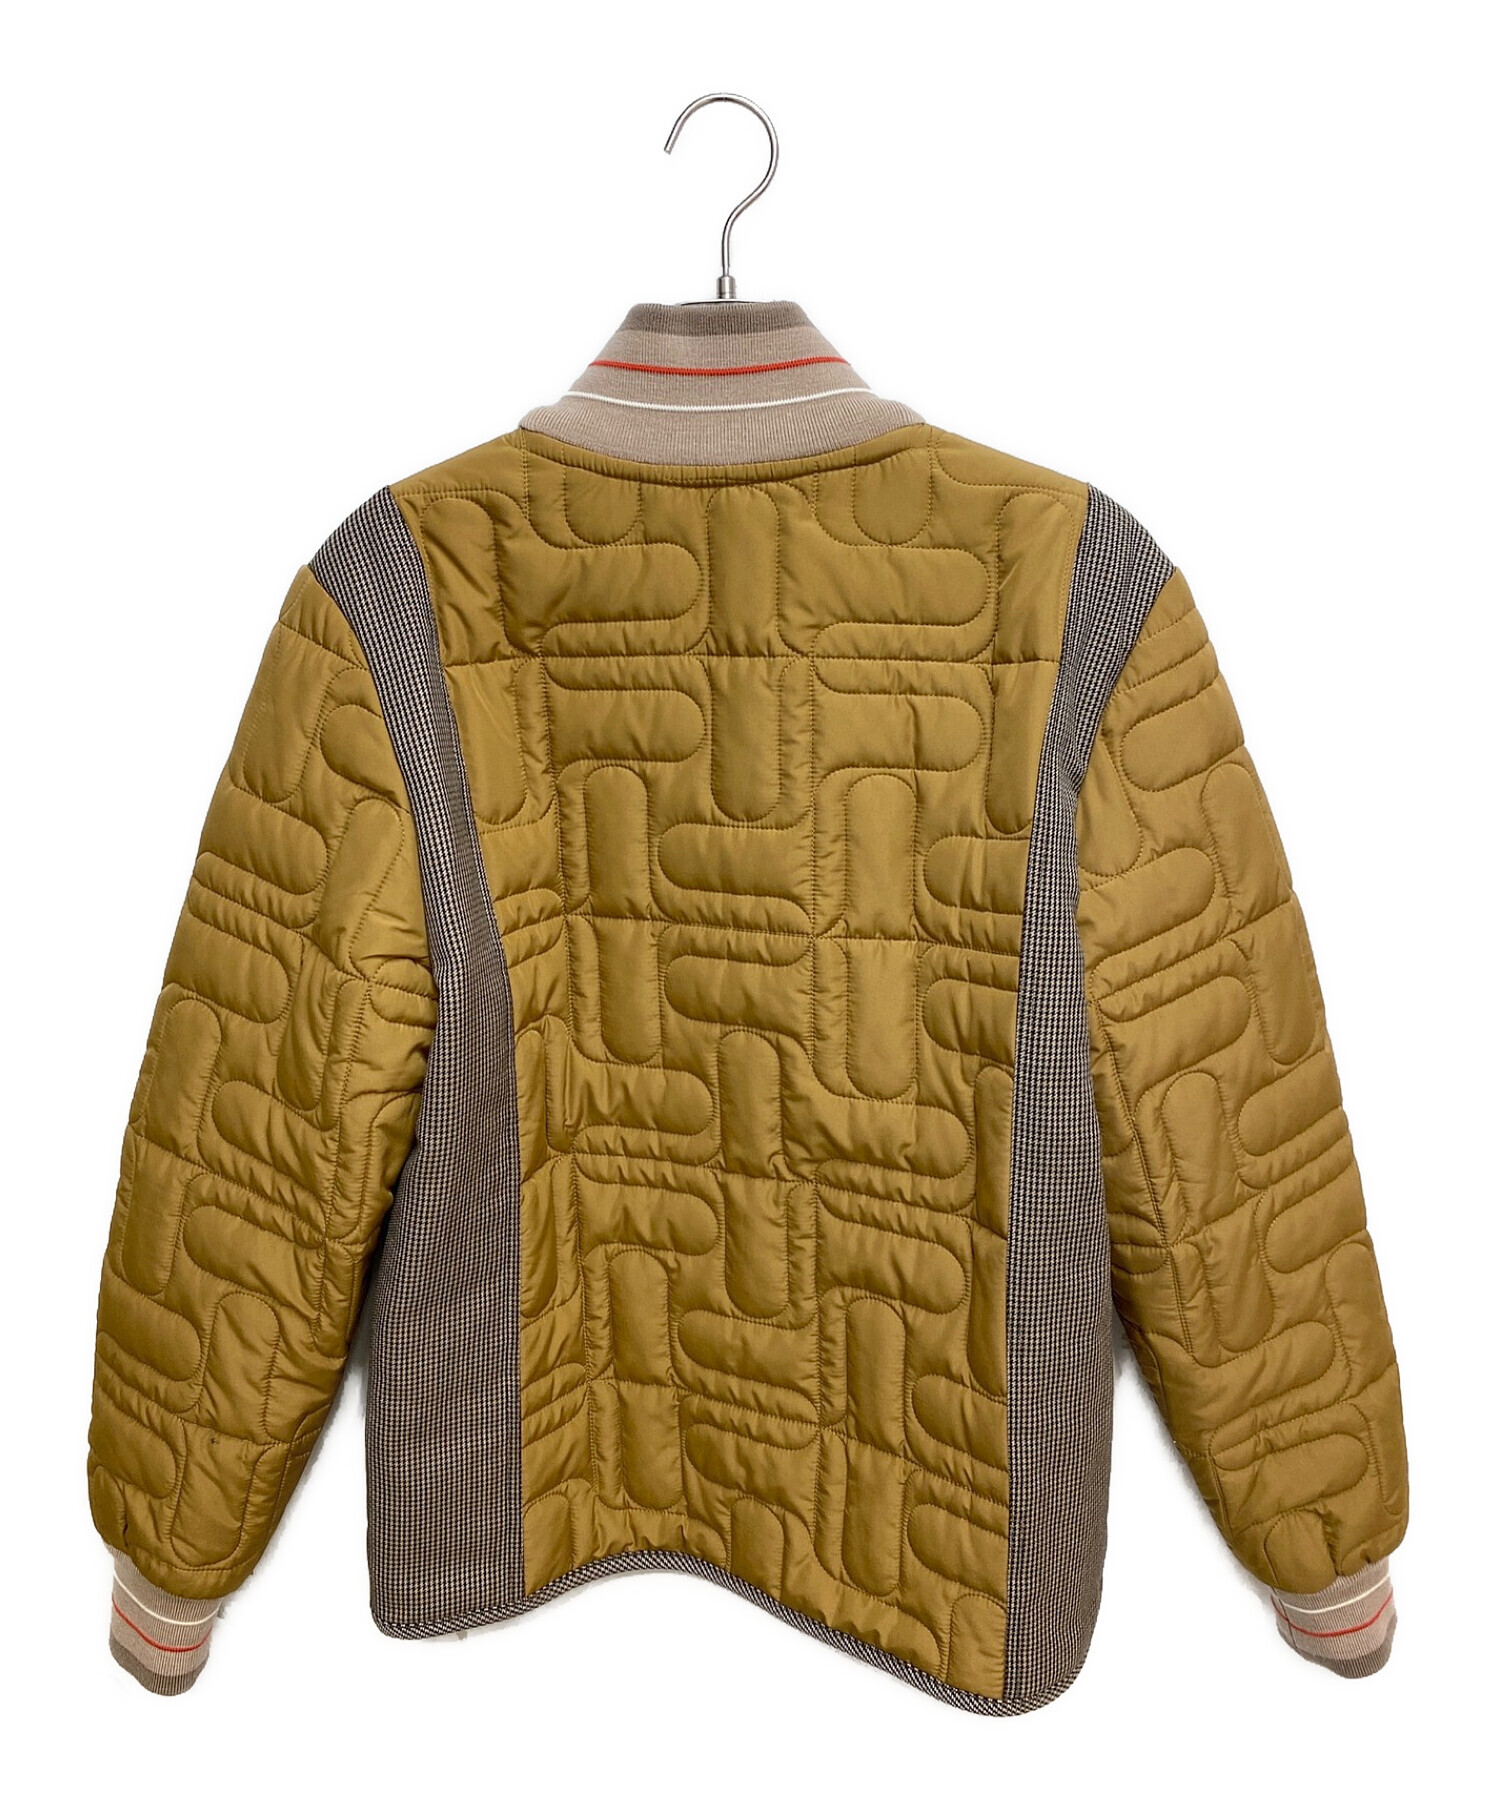 WALES BONNER (ウェールズボナー) QUILTED TECHNICAL EXPRESSION ZIP JACKET サンド サイズ:44